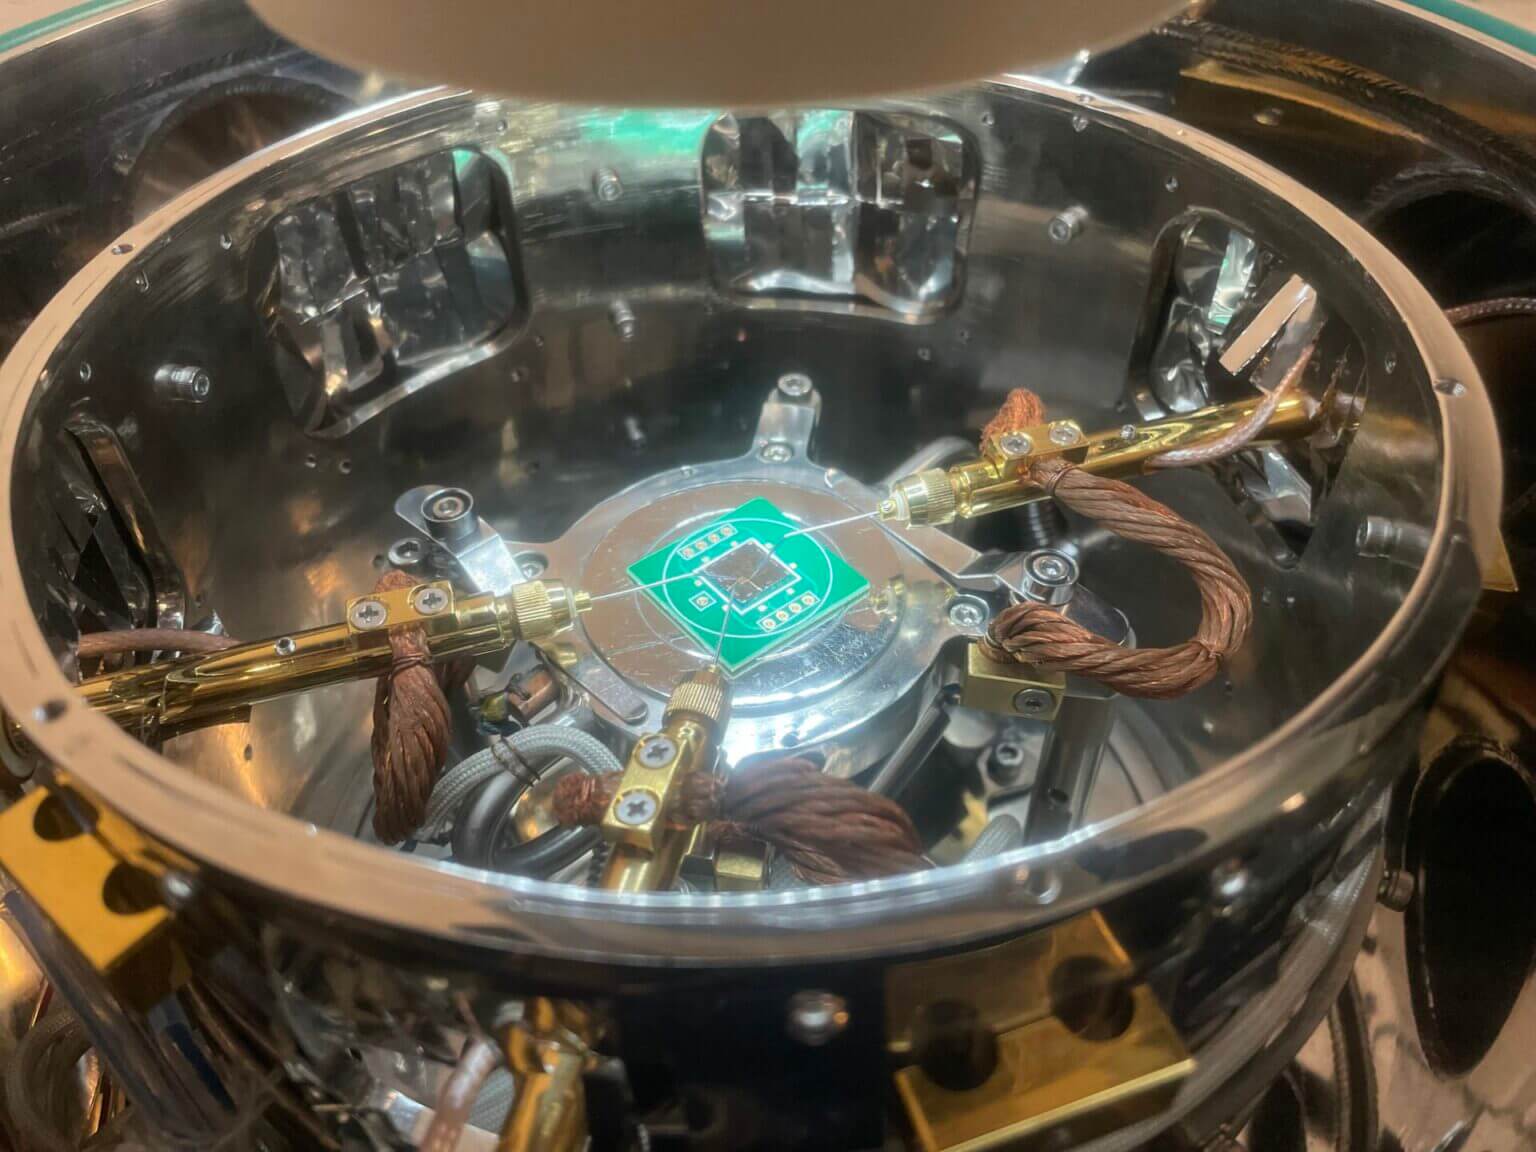 The team's ferroelectric neuromorphic computing chip, shown here undergoing testing in the lab.